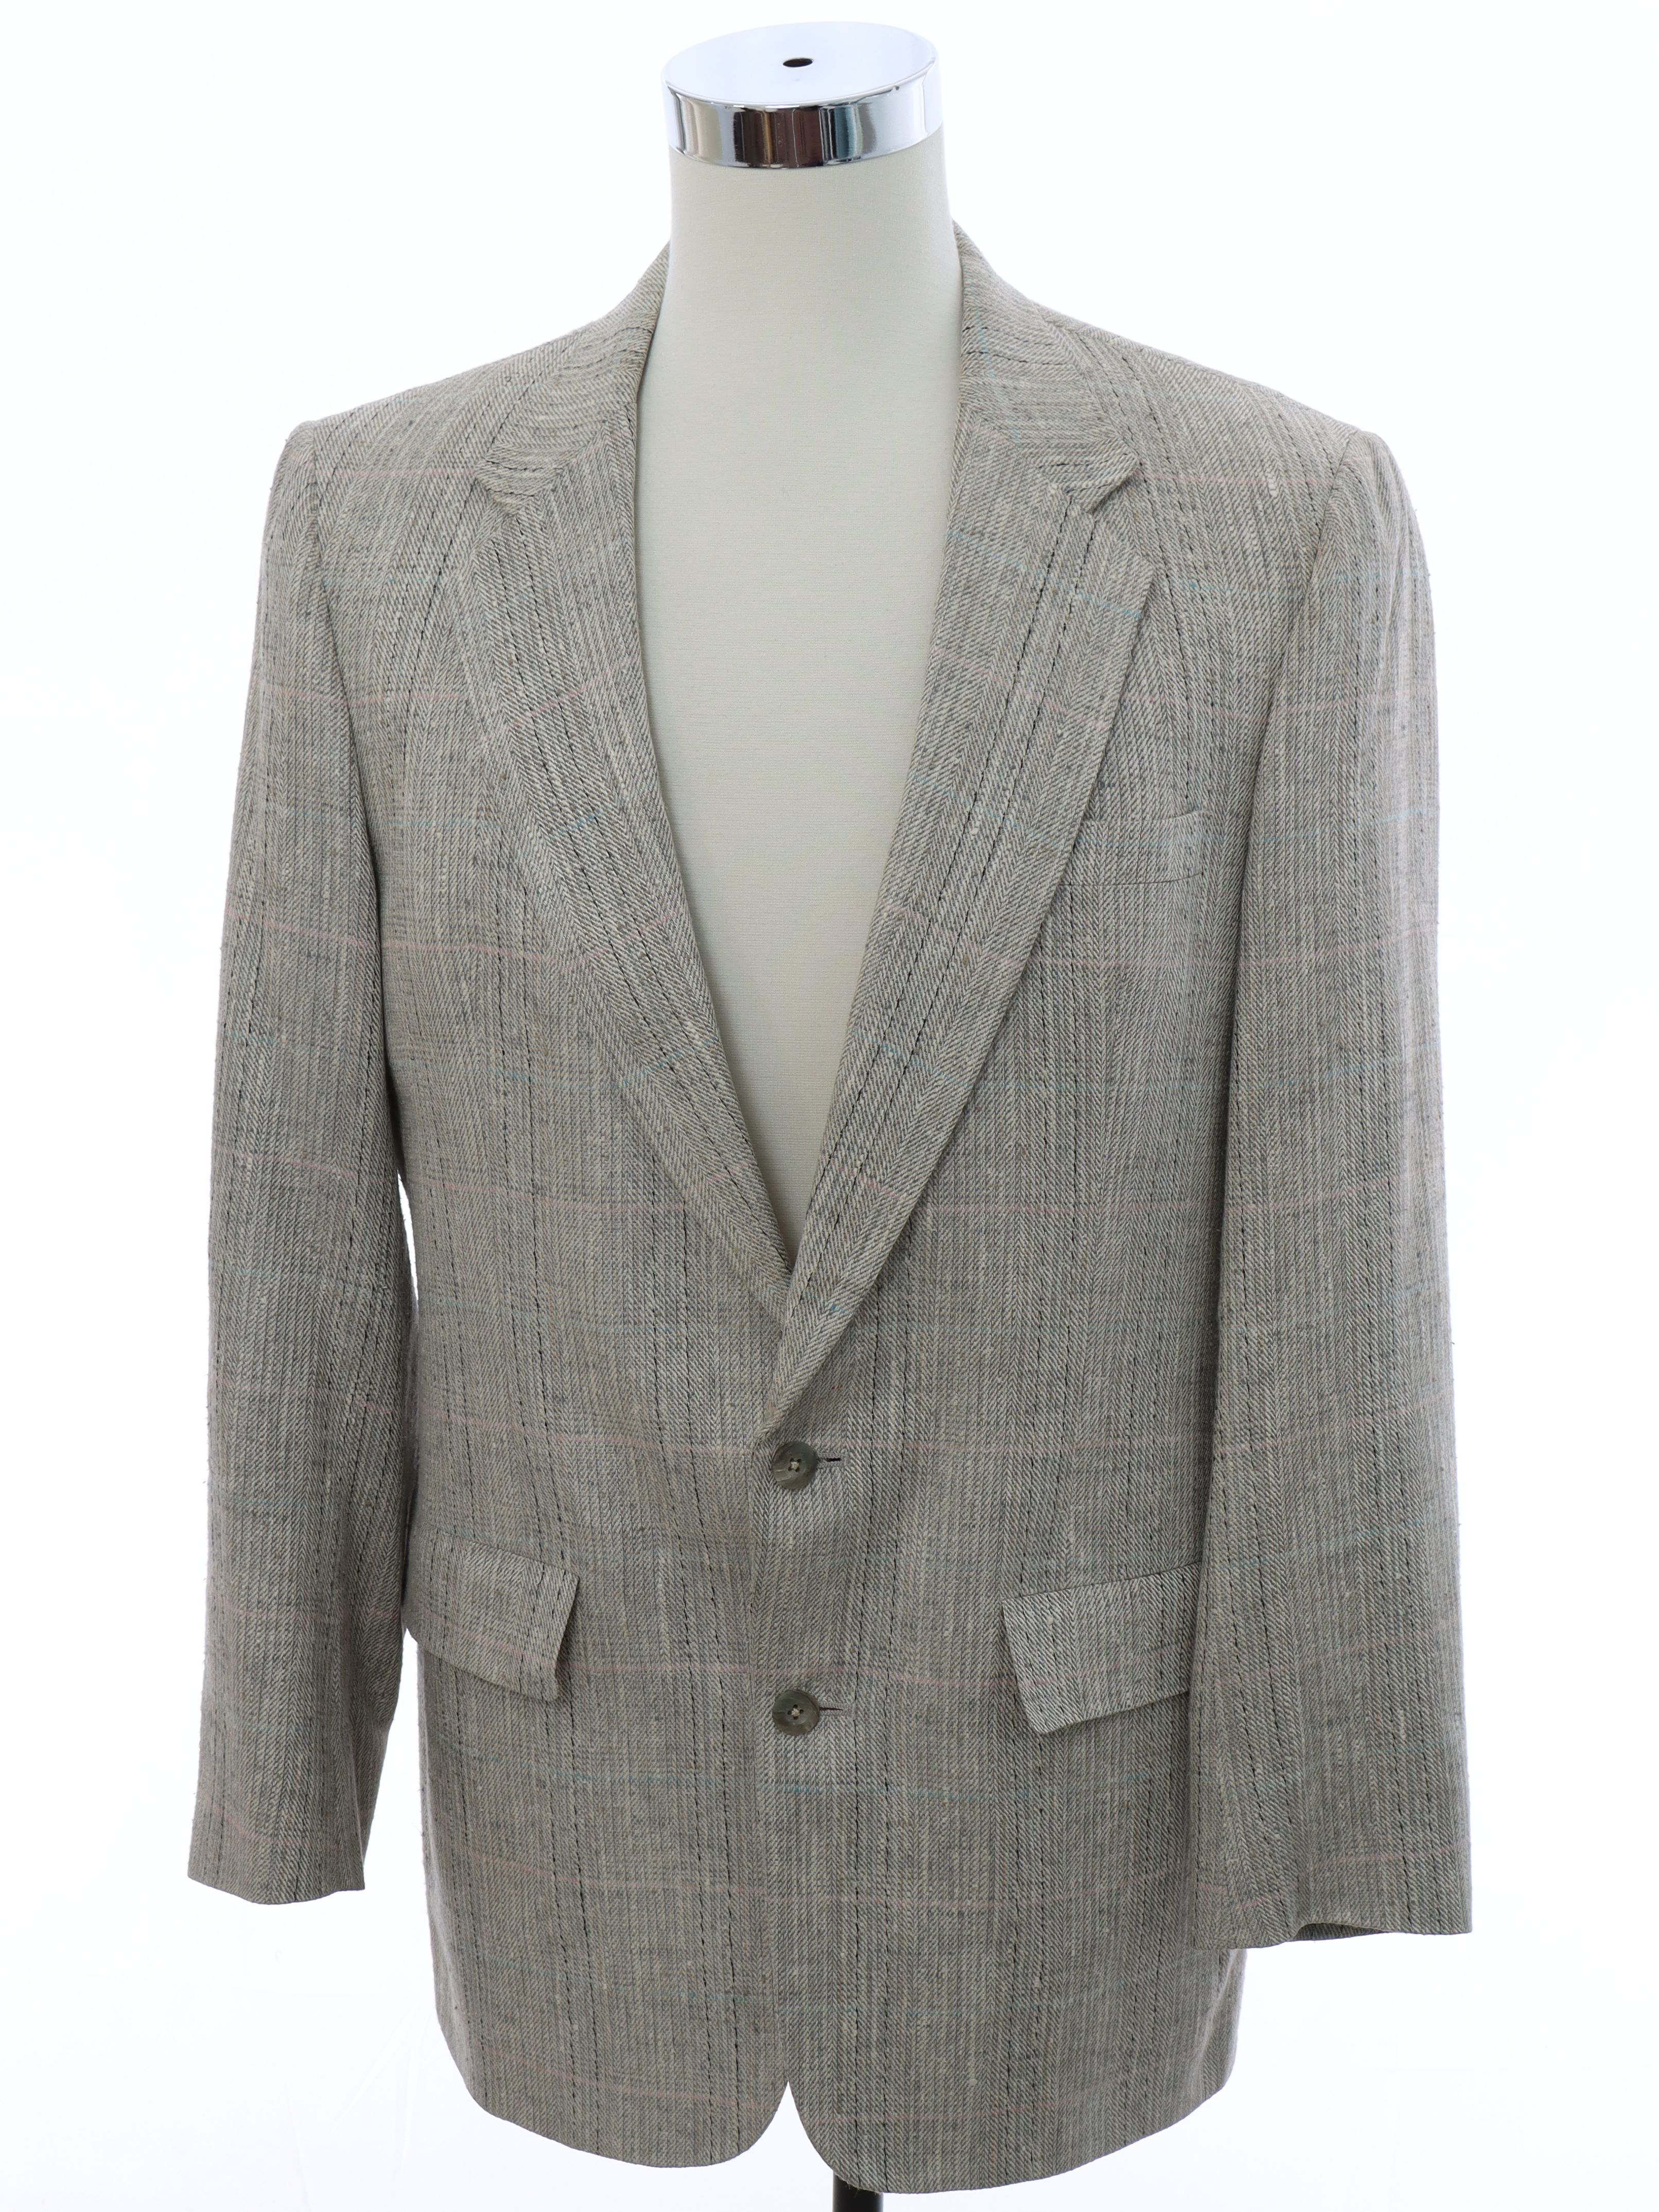 Seventies Christian Dior Monsieur Jacket: Late 70s or early 80s ...